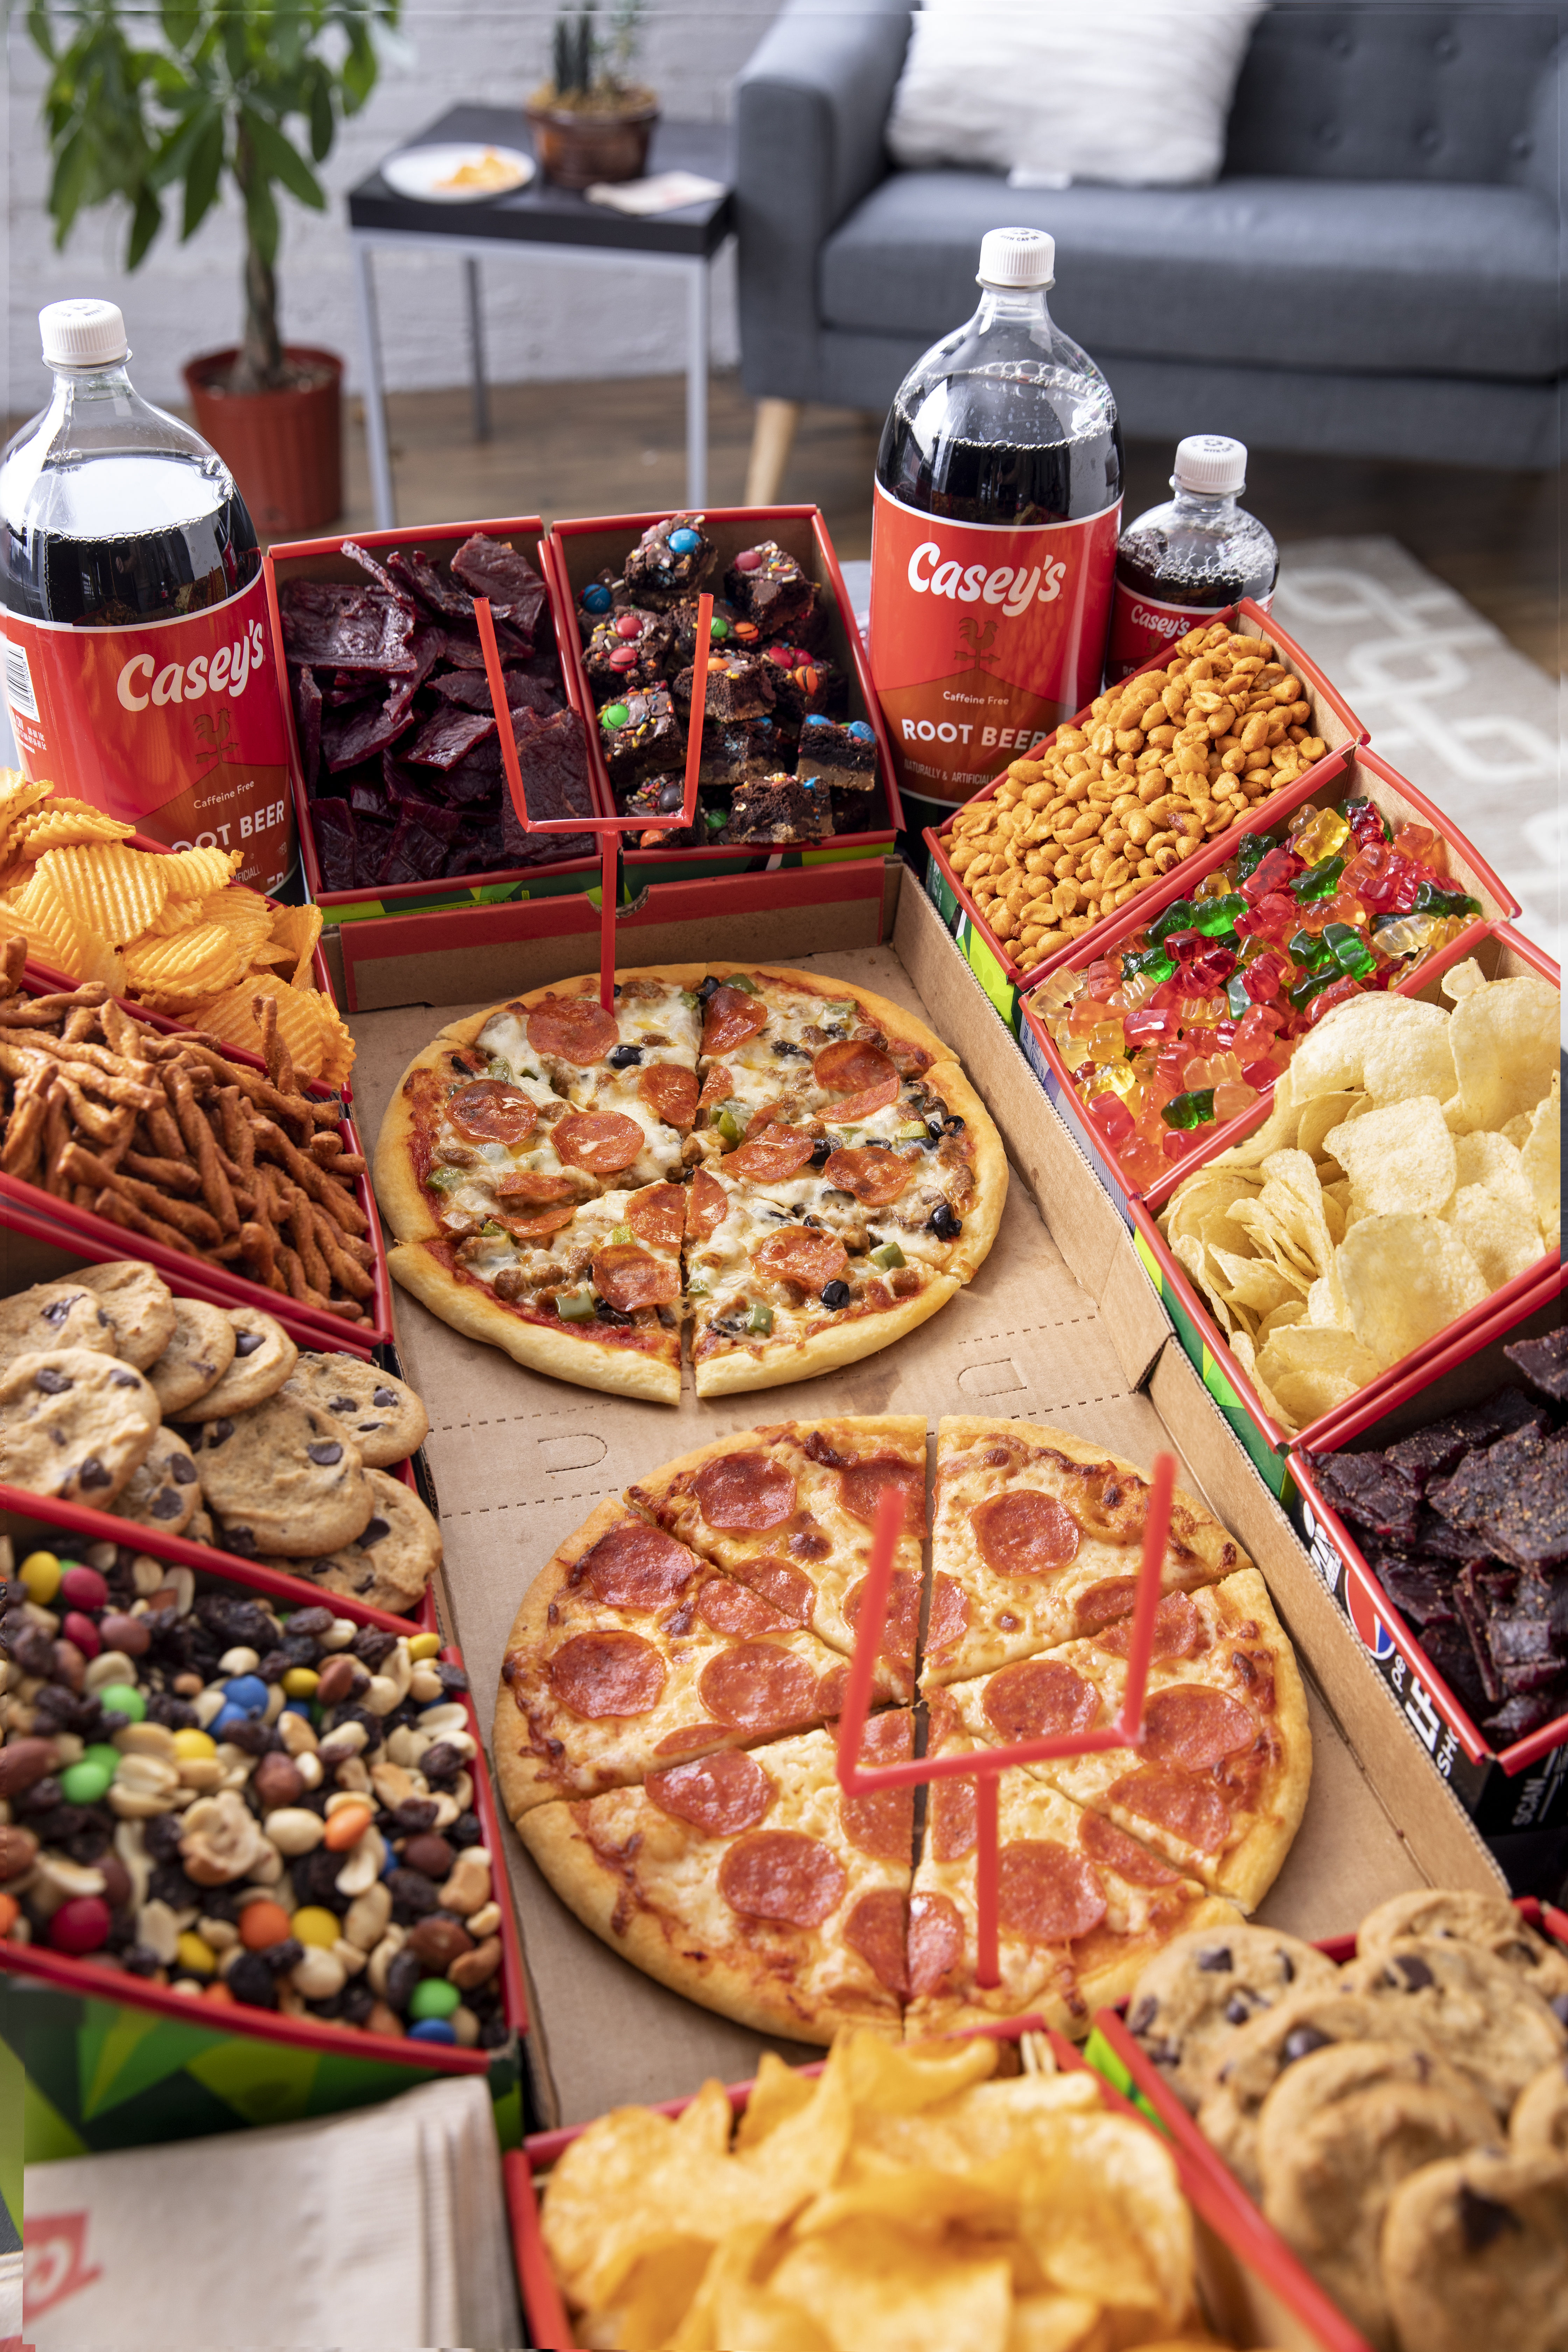 A mix of Casey's pizza, snacks, and other foods creating a football stadium